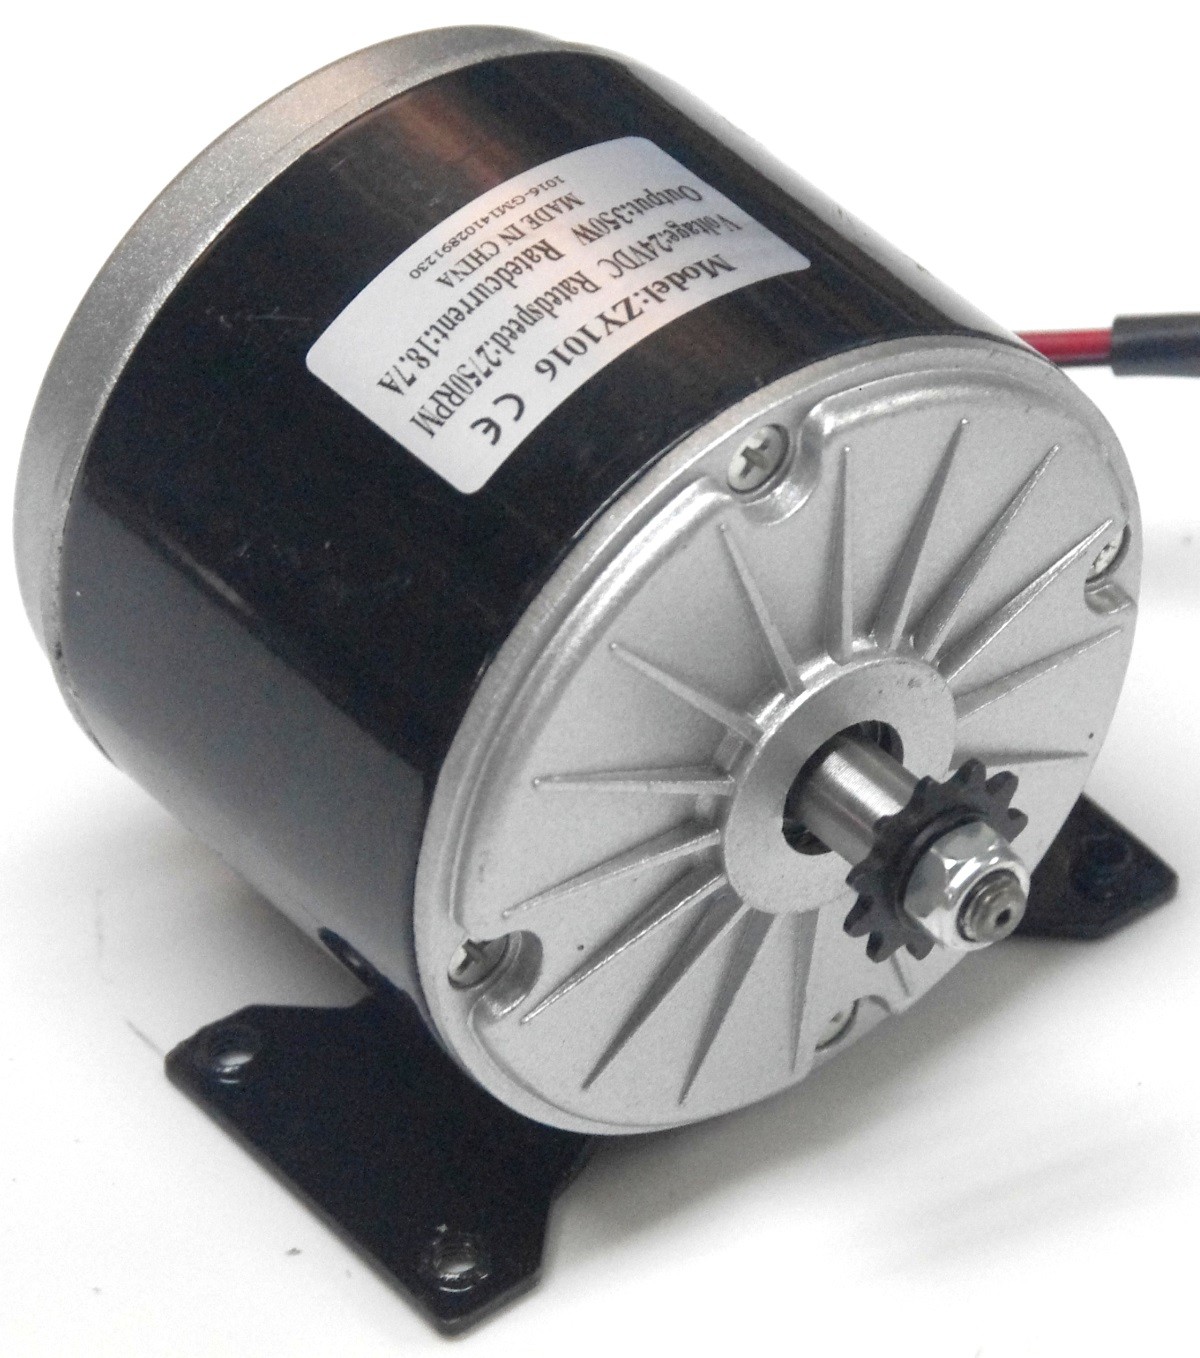 24 volt dc motor for bicycle